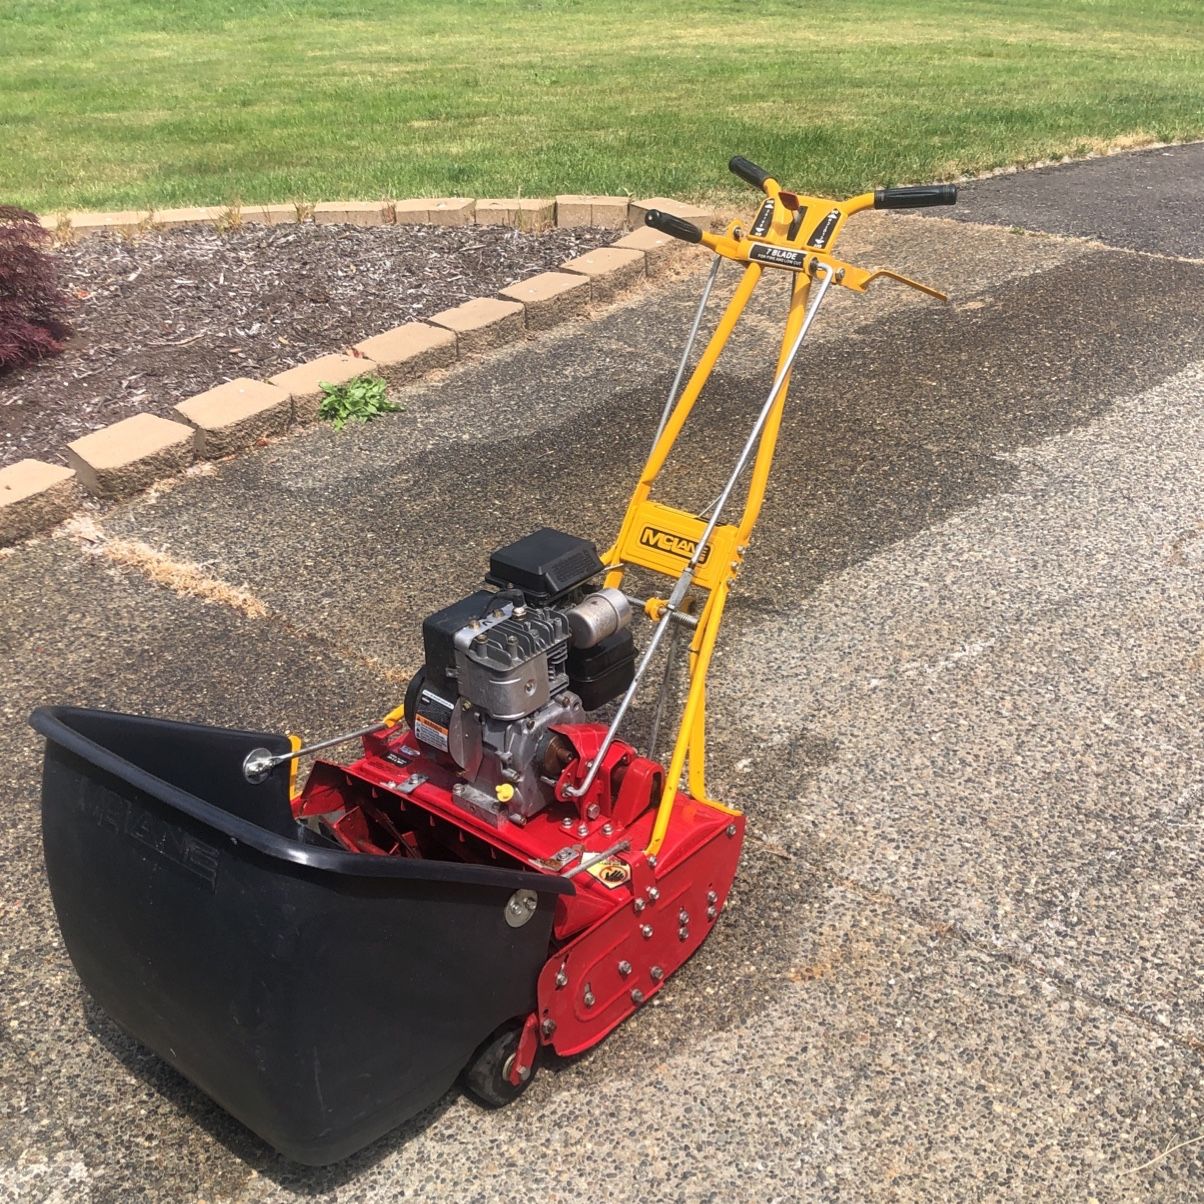 McLane Mower for Sale in Snohomish, WA - OfferUp